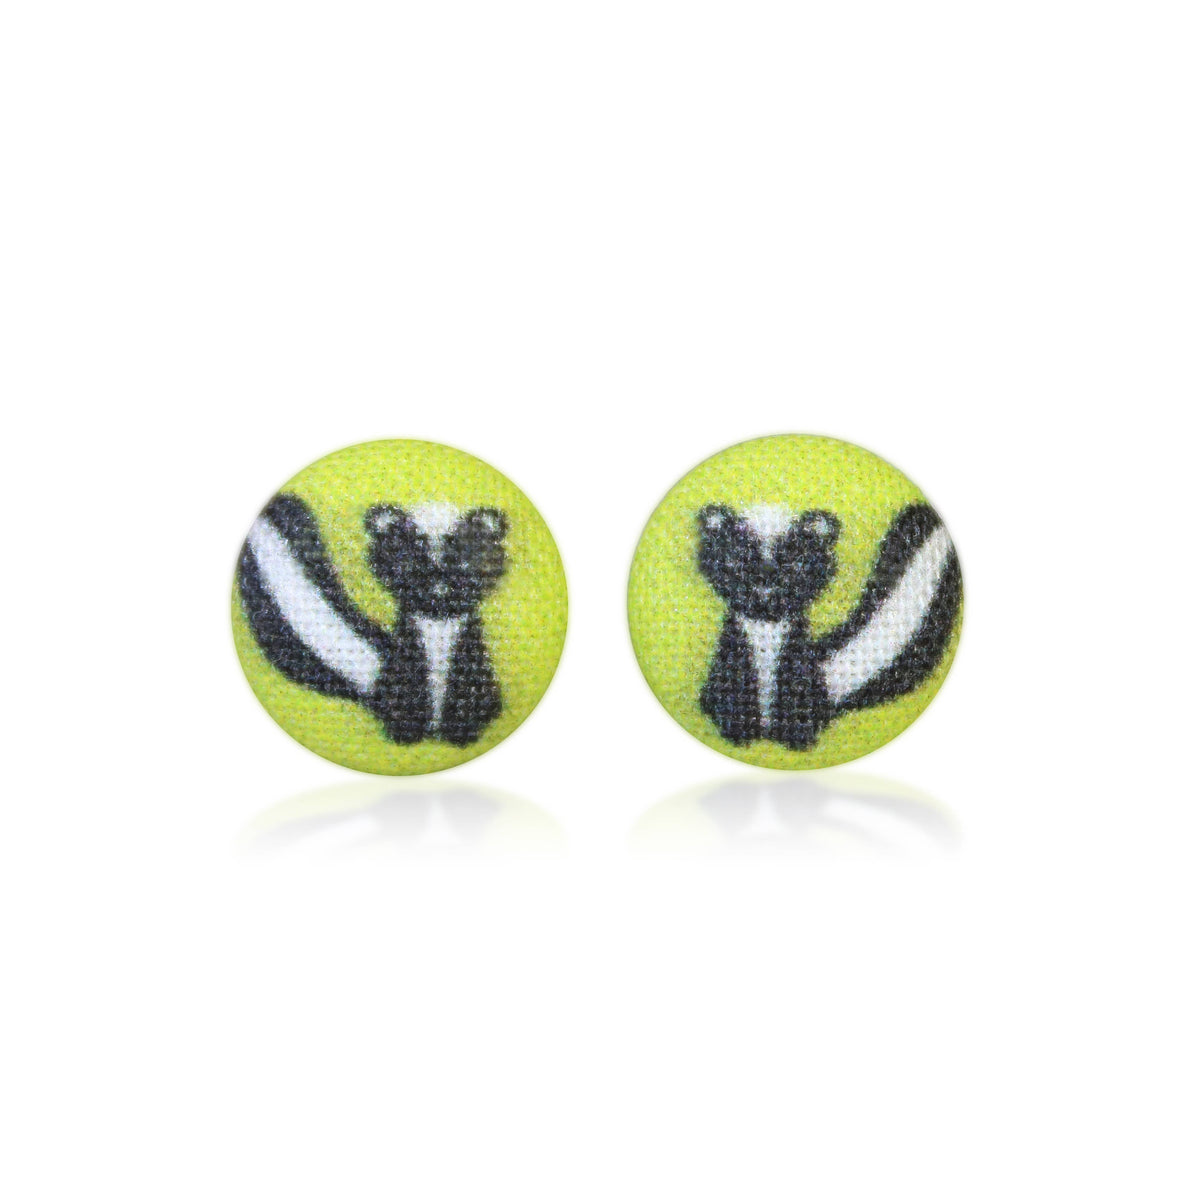 Adorable Skunk Fabric Button Earrings